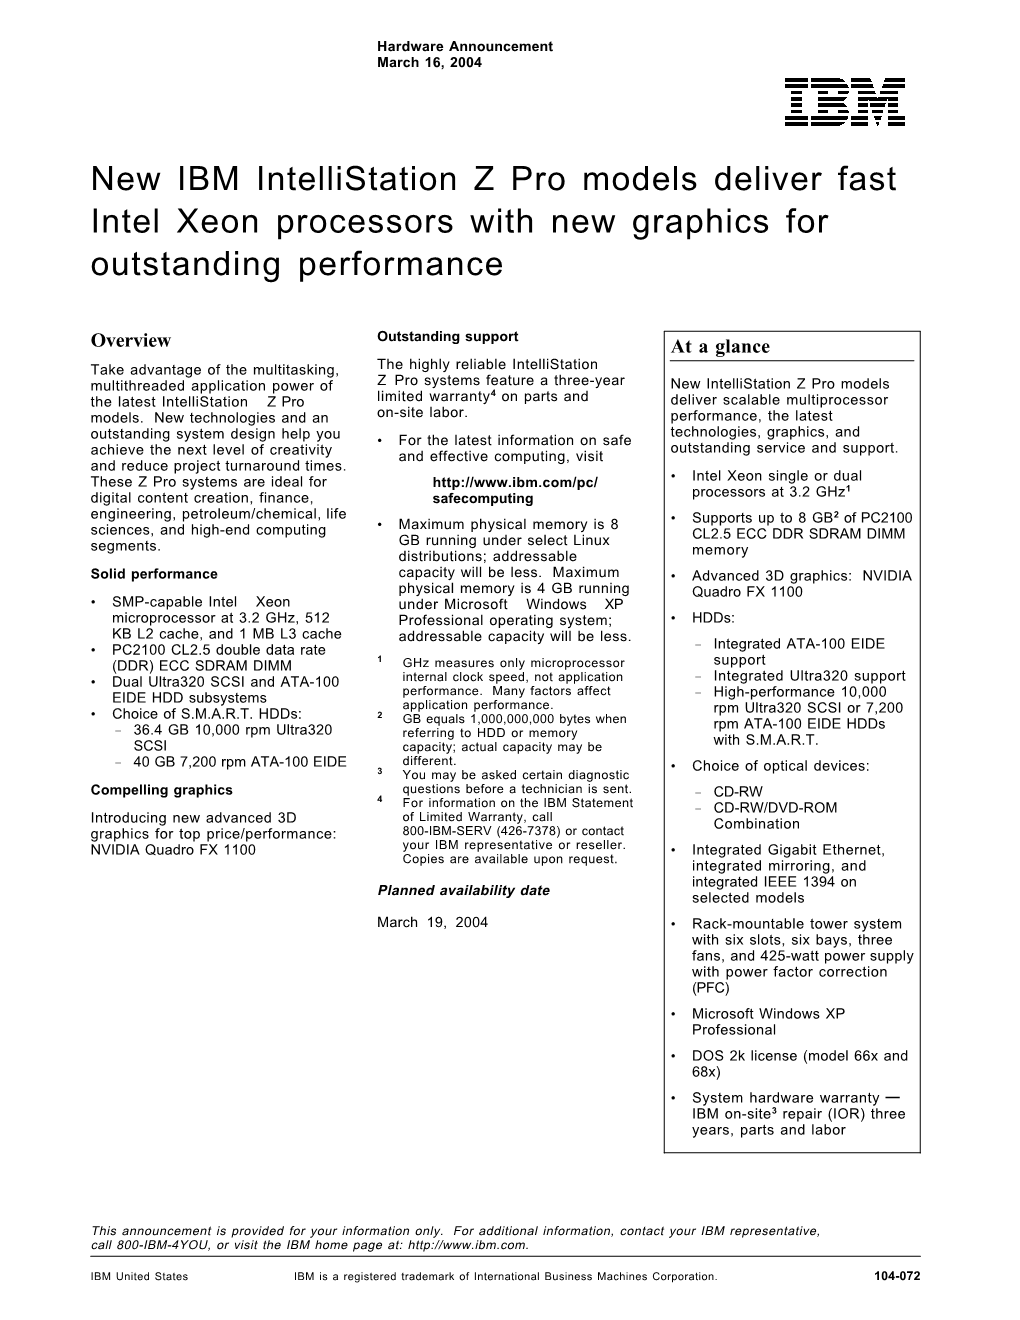 New IBM Intellistation Z Pro Models Deliver Fast Intel Xeon Processors with New Graphics for Outstanding Performance